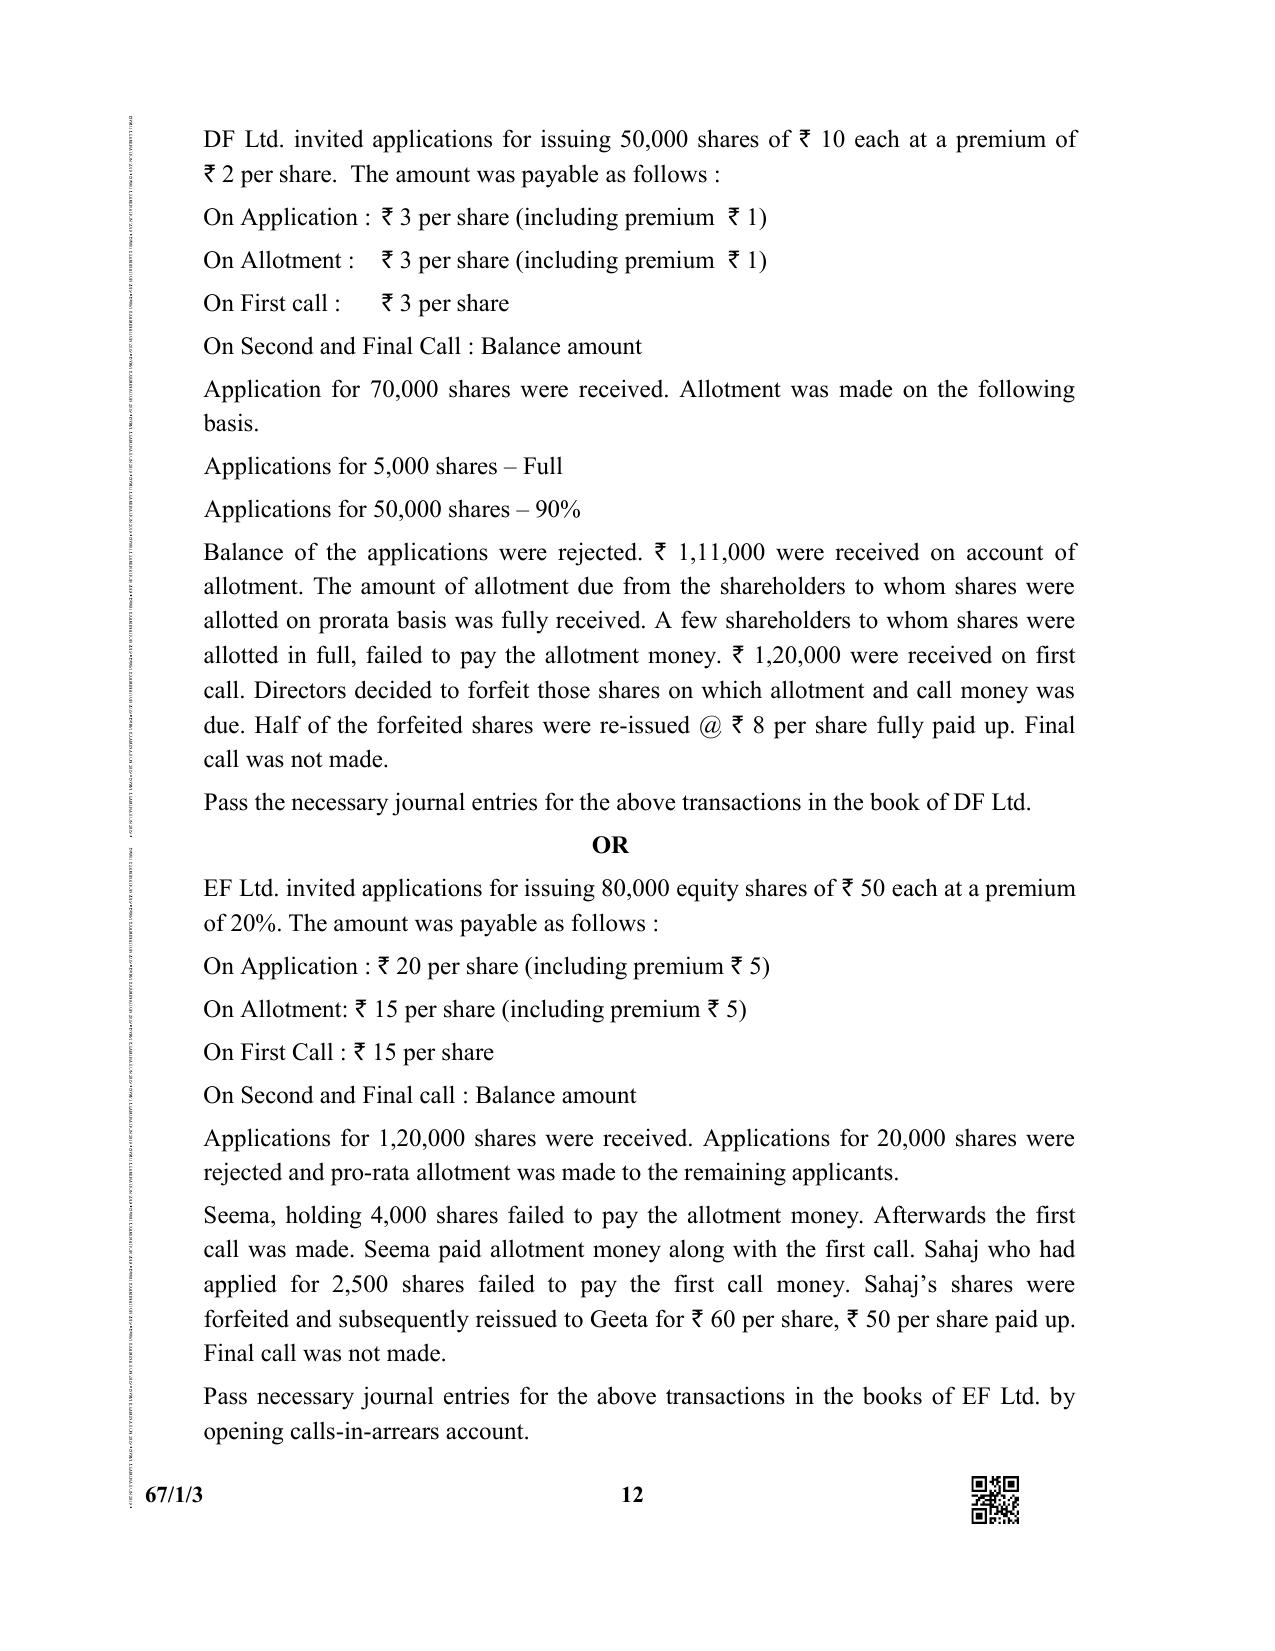 CBSE Class 12 67-1-3  (Accountancy) 2019 Question Paper - Page 12